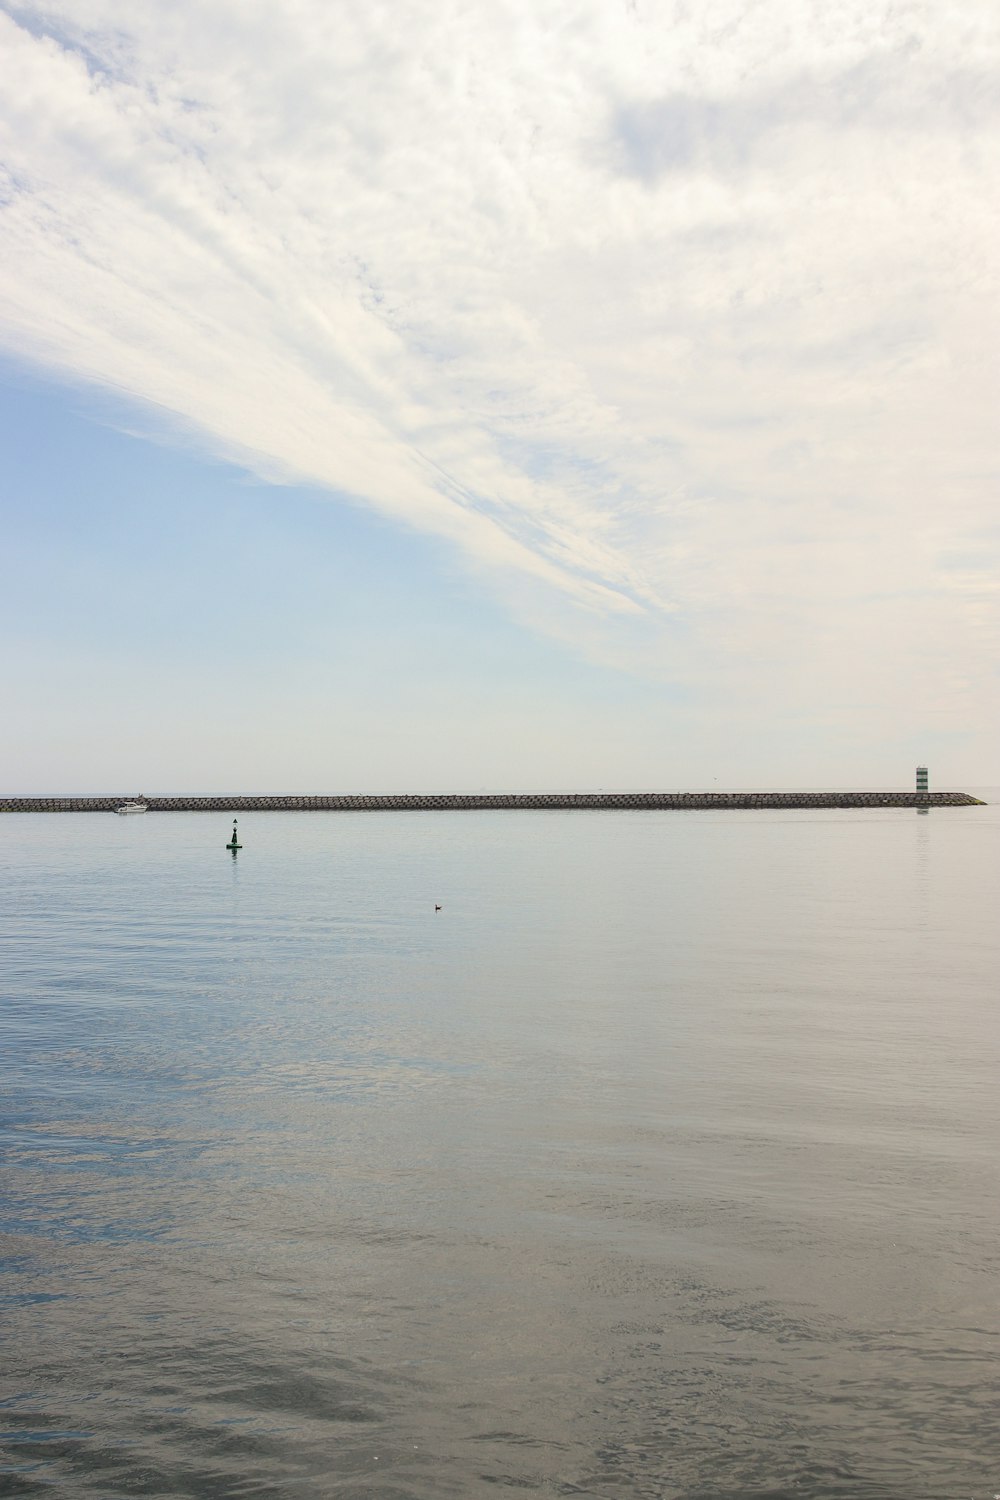 a large body of water with a long bridge in the distance